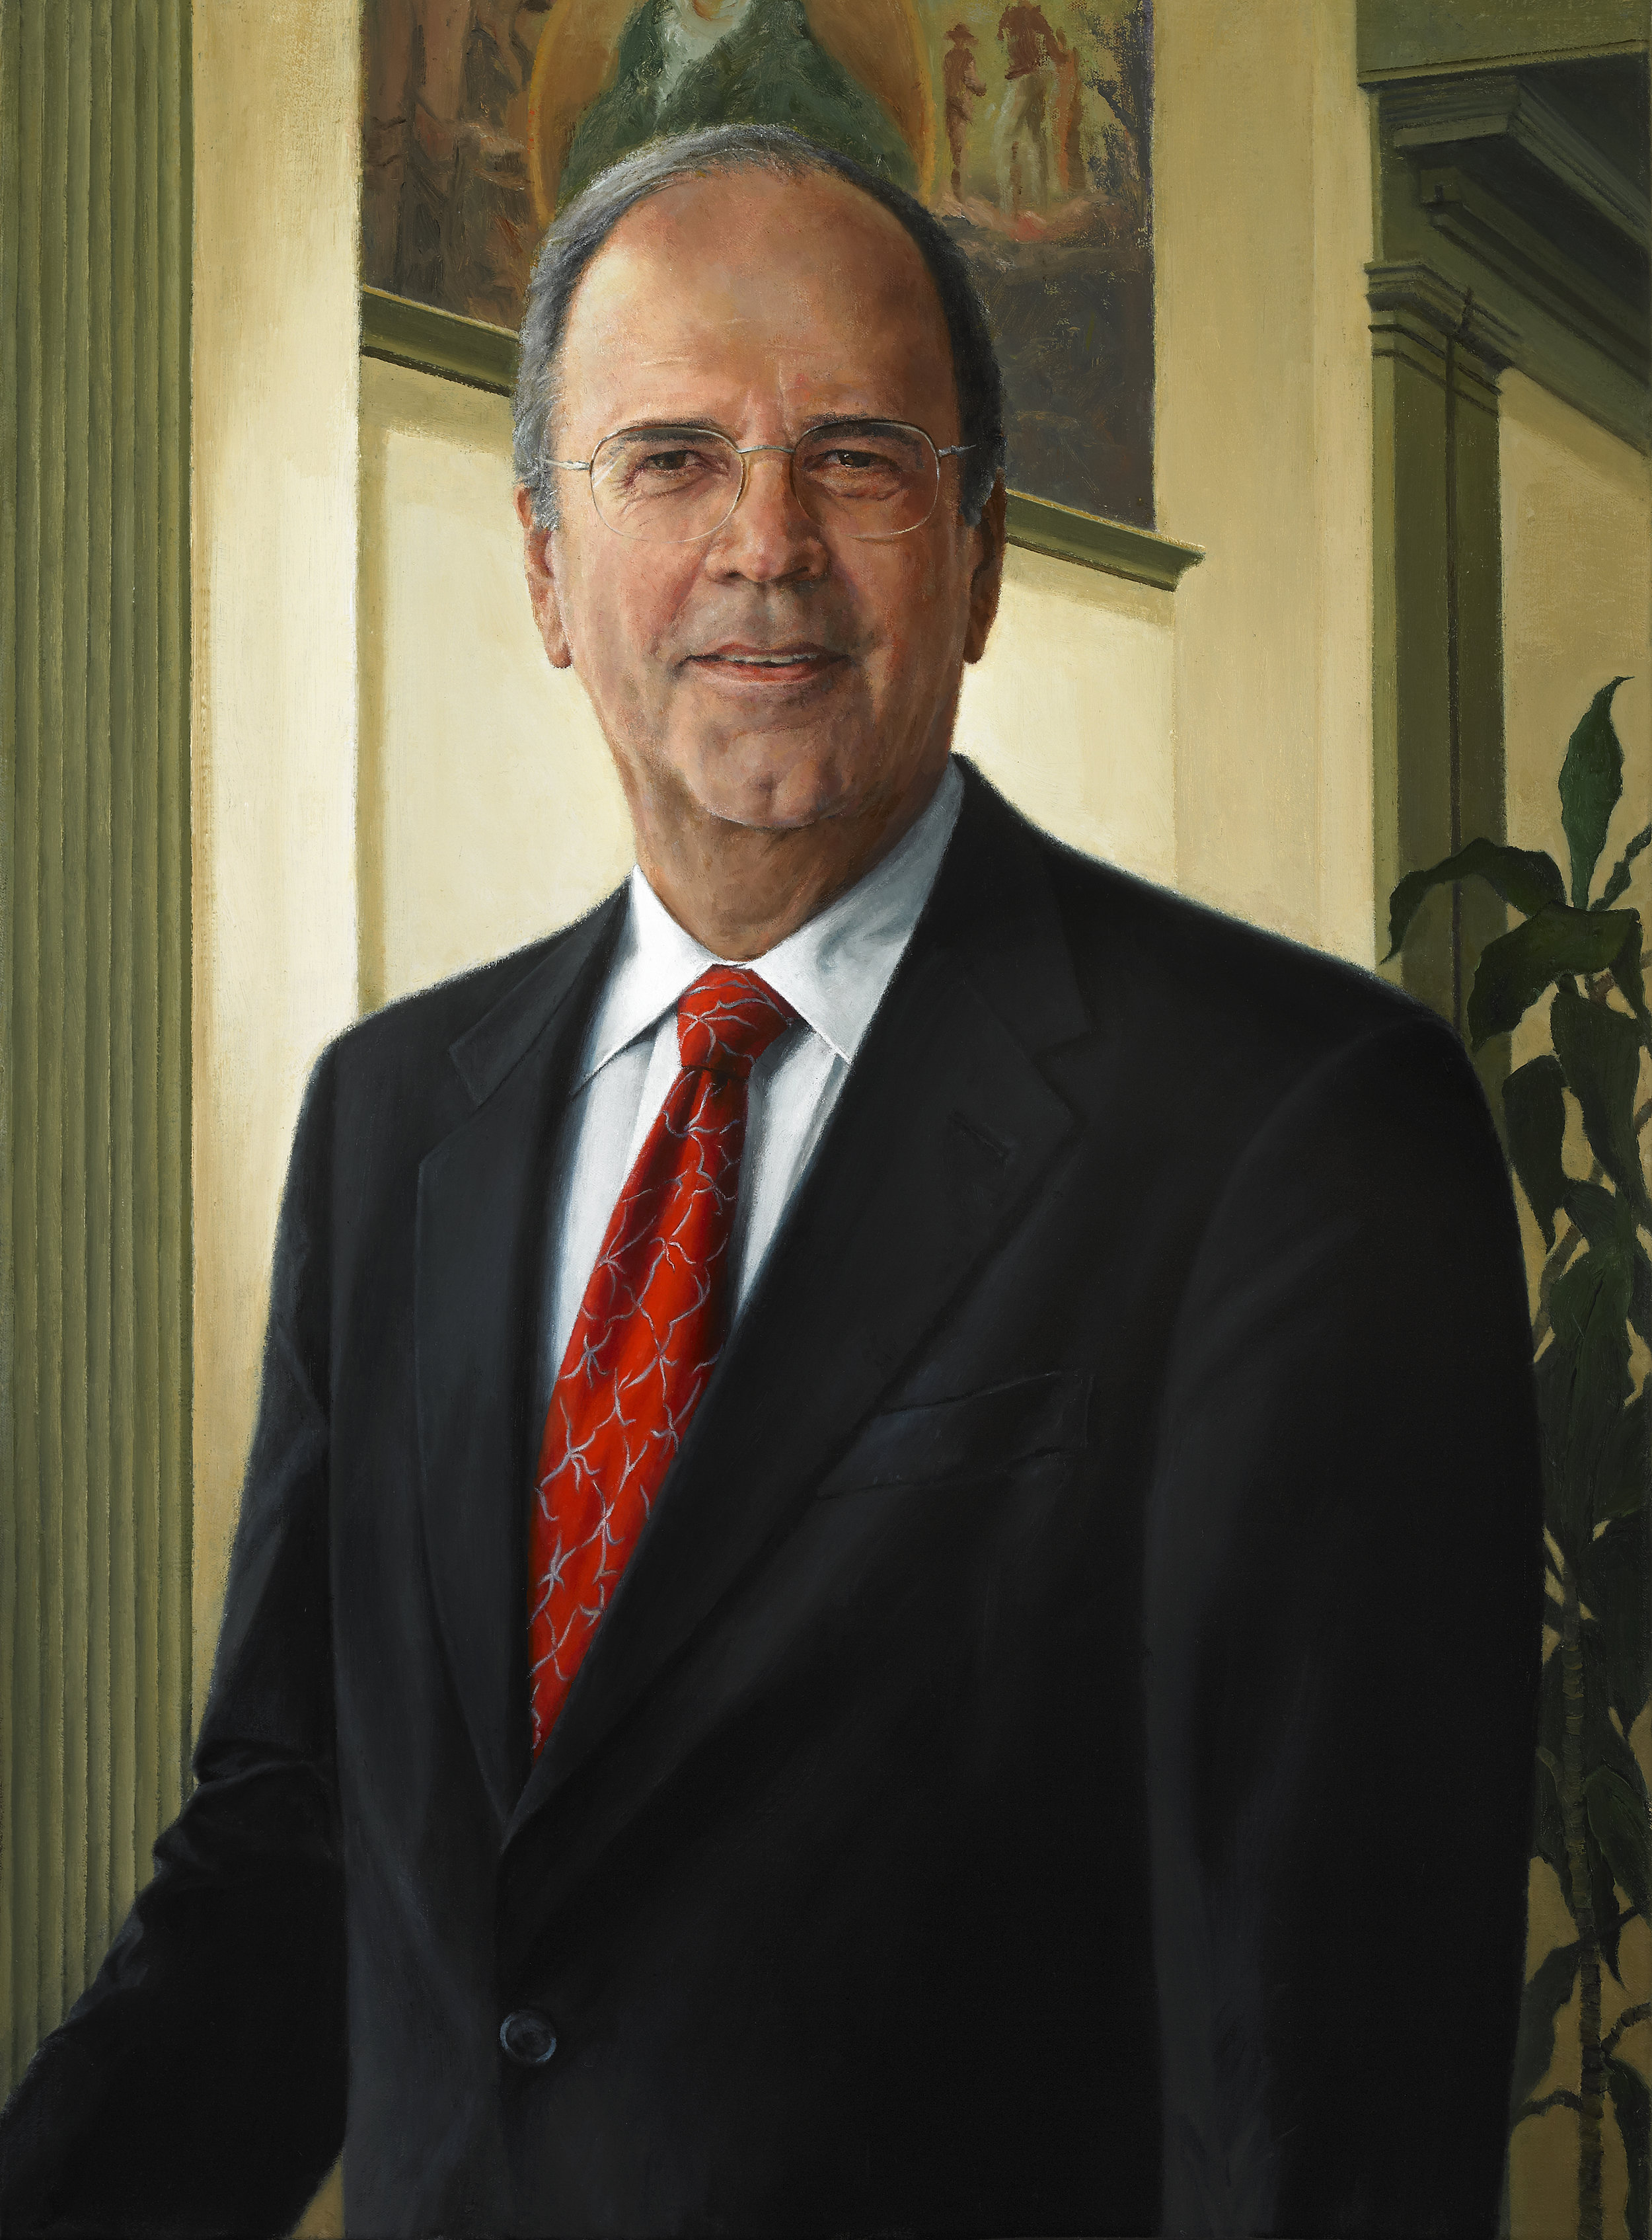   R. Scott Smith, Jr., Chairman and Chief Executive Officer, Fulton Financial Corporation , Oil on canvas, 2012, 30" x 22"  Private Collection, Fulton Financial Corporation, Lancaster, PA 